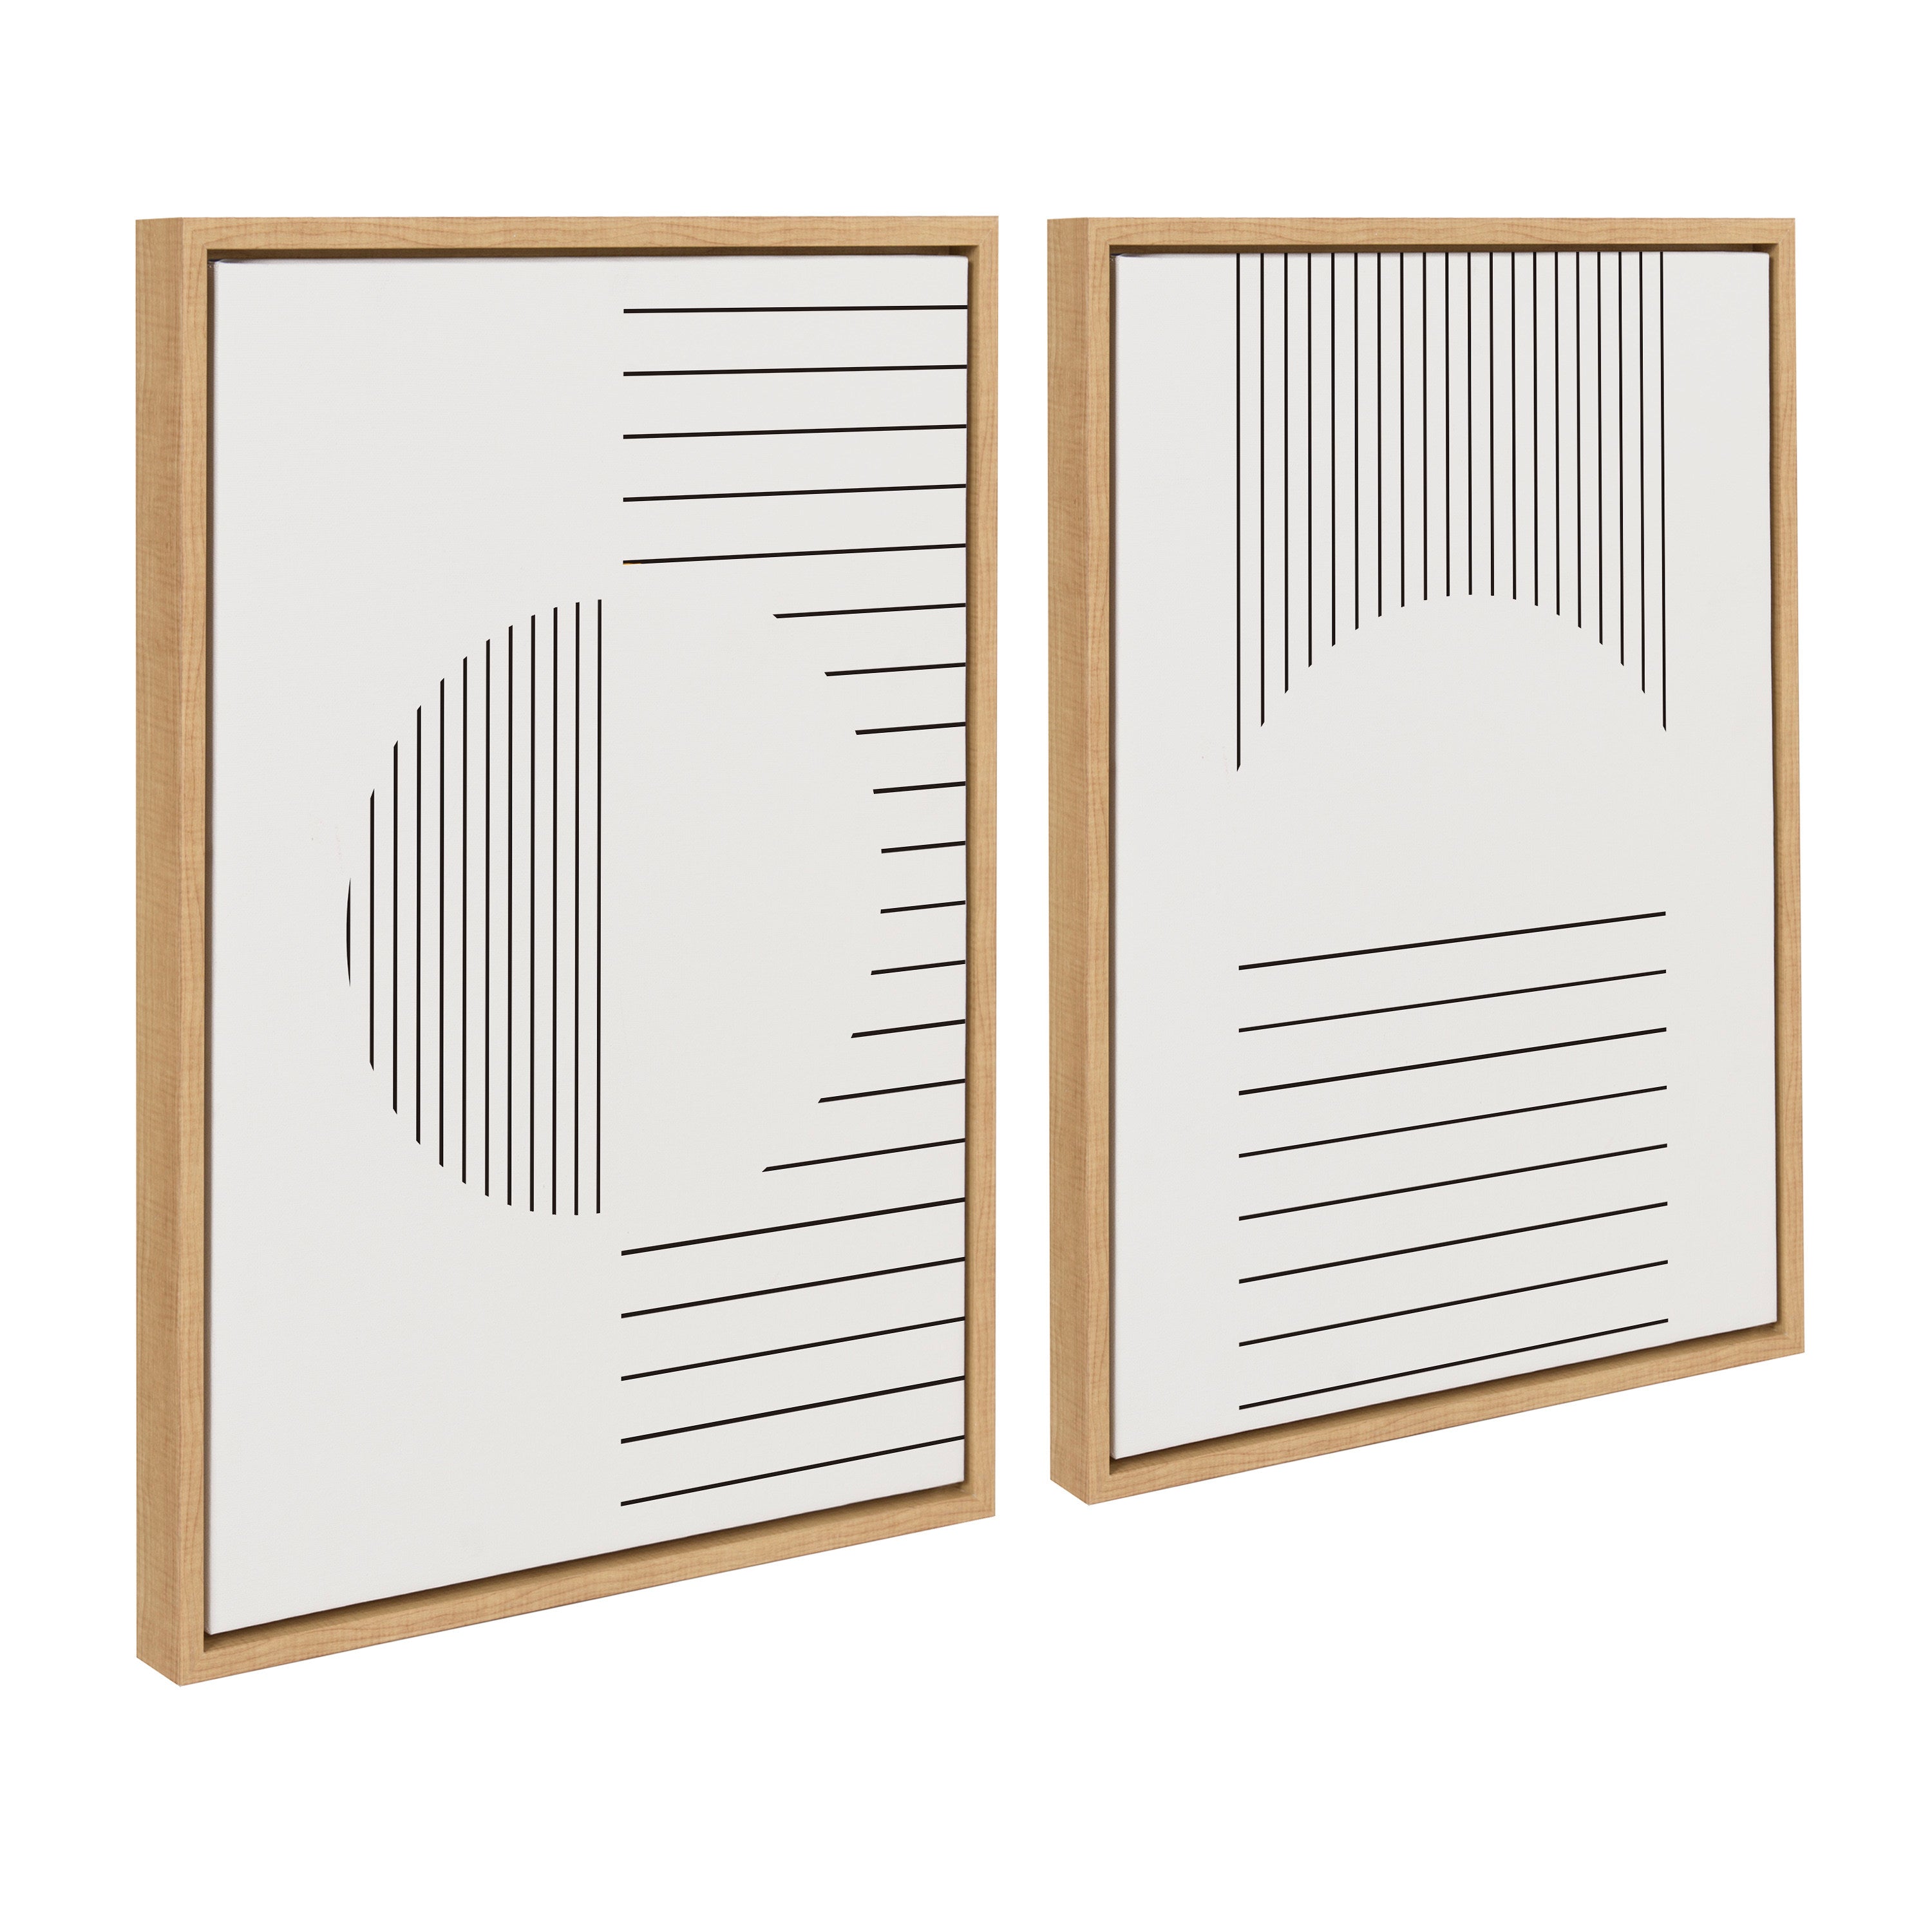 Sylvie Modern Statement Stripes 1 and 2 Framed Canvas by The Creative Bunch Studio